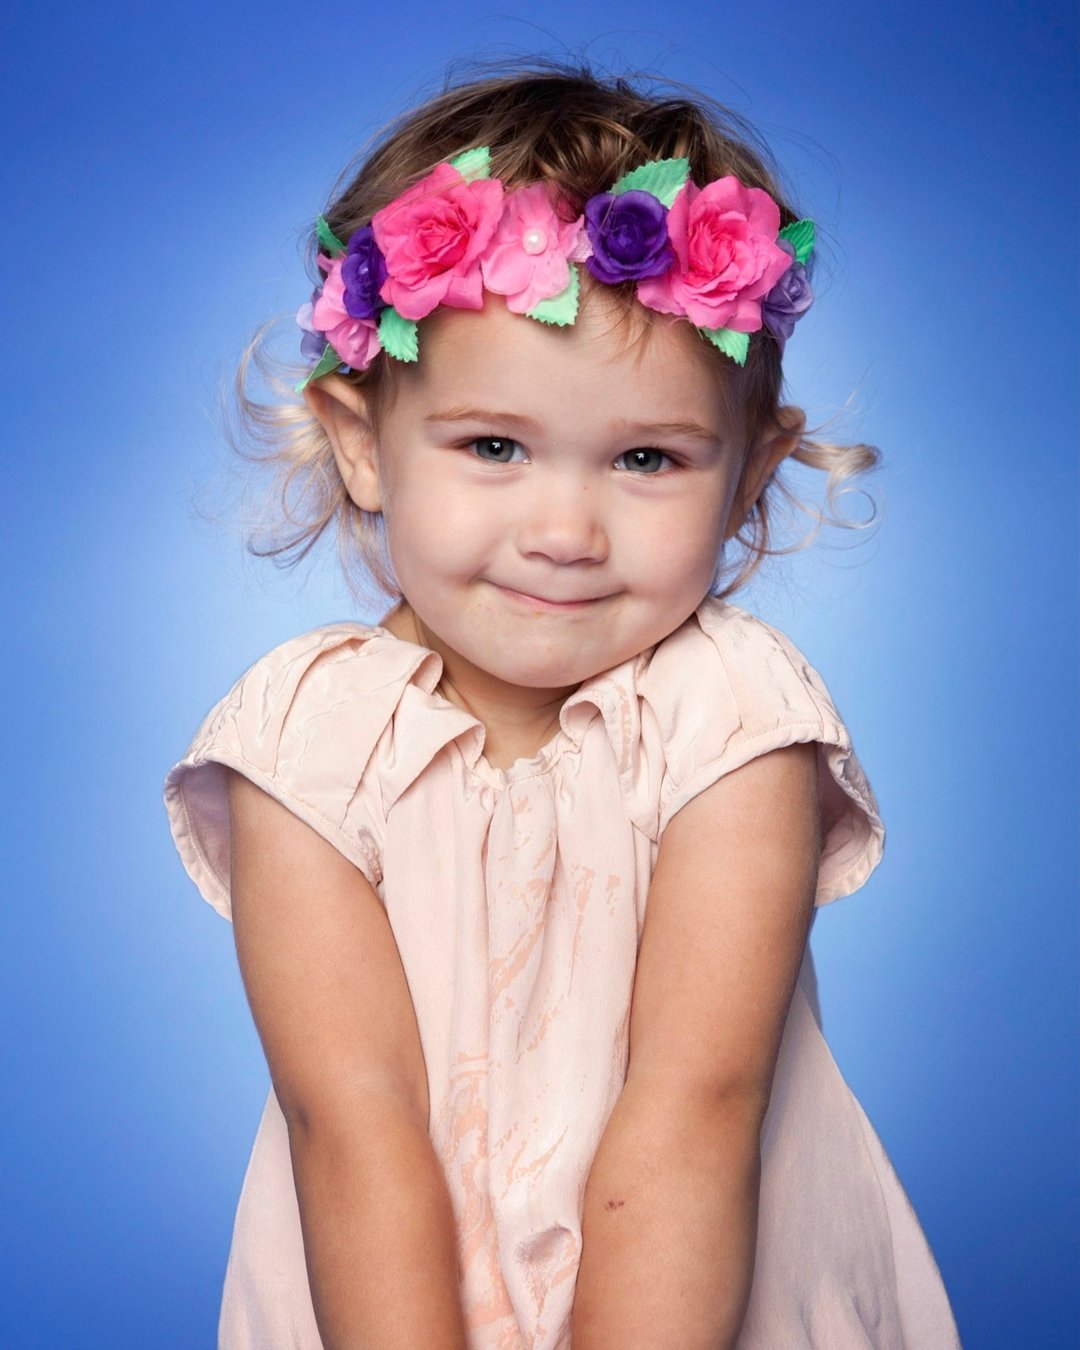 Blonde and blooming! 🌼💙🌸✨ 

Say hello to our little flower child ready to bloom on camera! 📸💙 

#FlowerChild #PictureDayMagic #schoolpictures2024 #schoolpics #schoolpictures #earlybird #nycschools #nycpublicschools #nyccharterschools #TEACHNYC